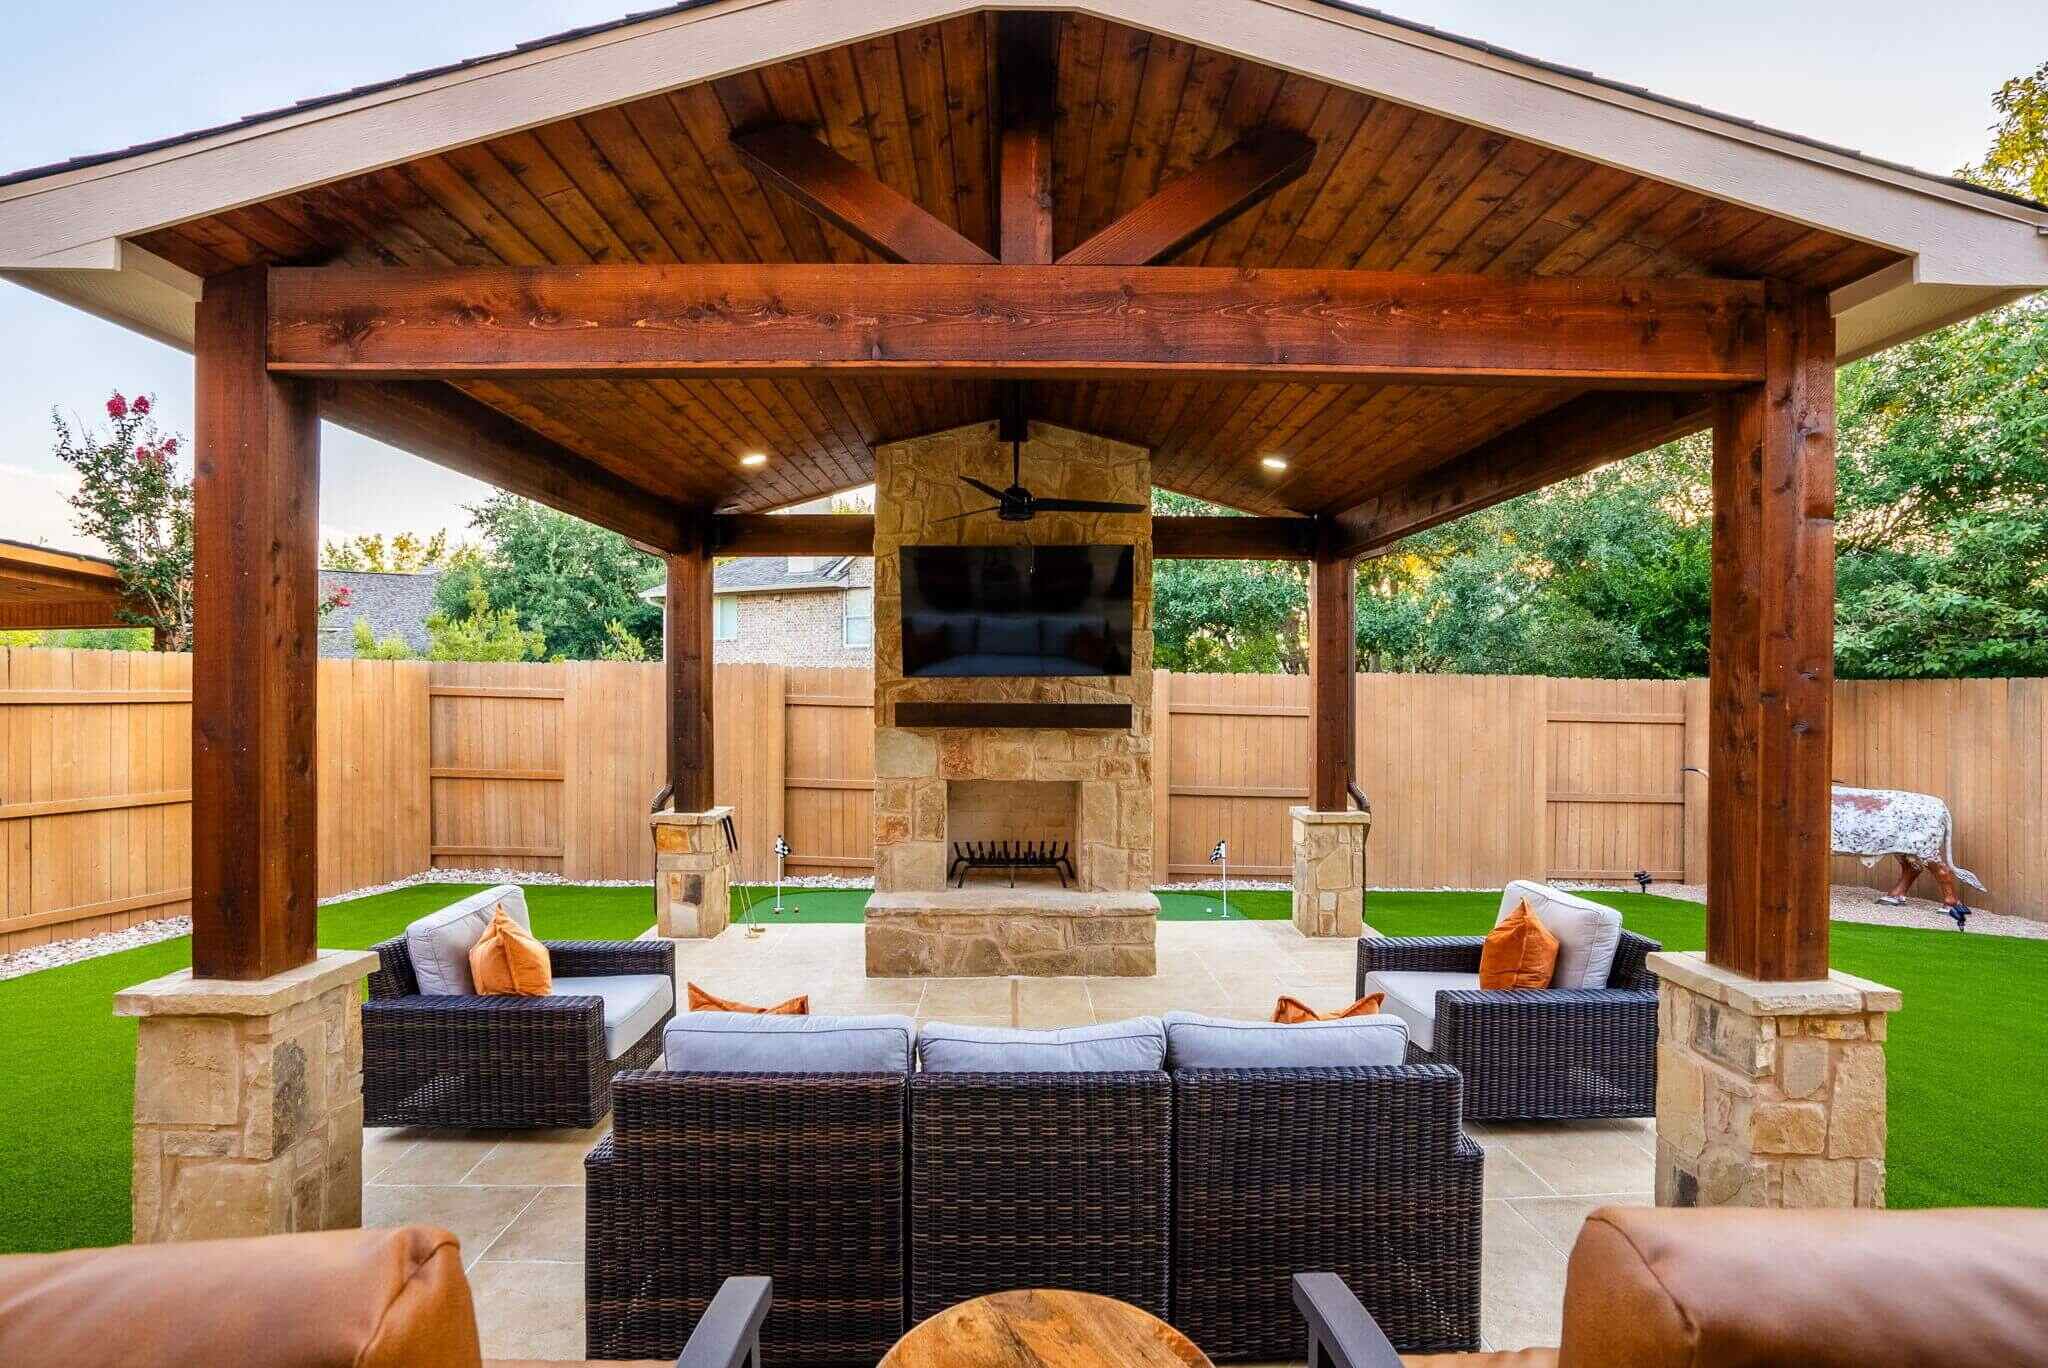 What Is A Covered Patio Called 1701073508 